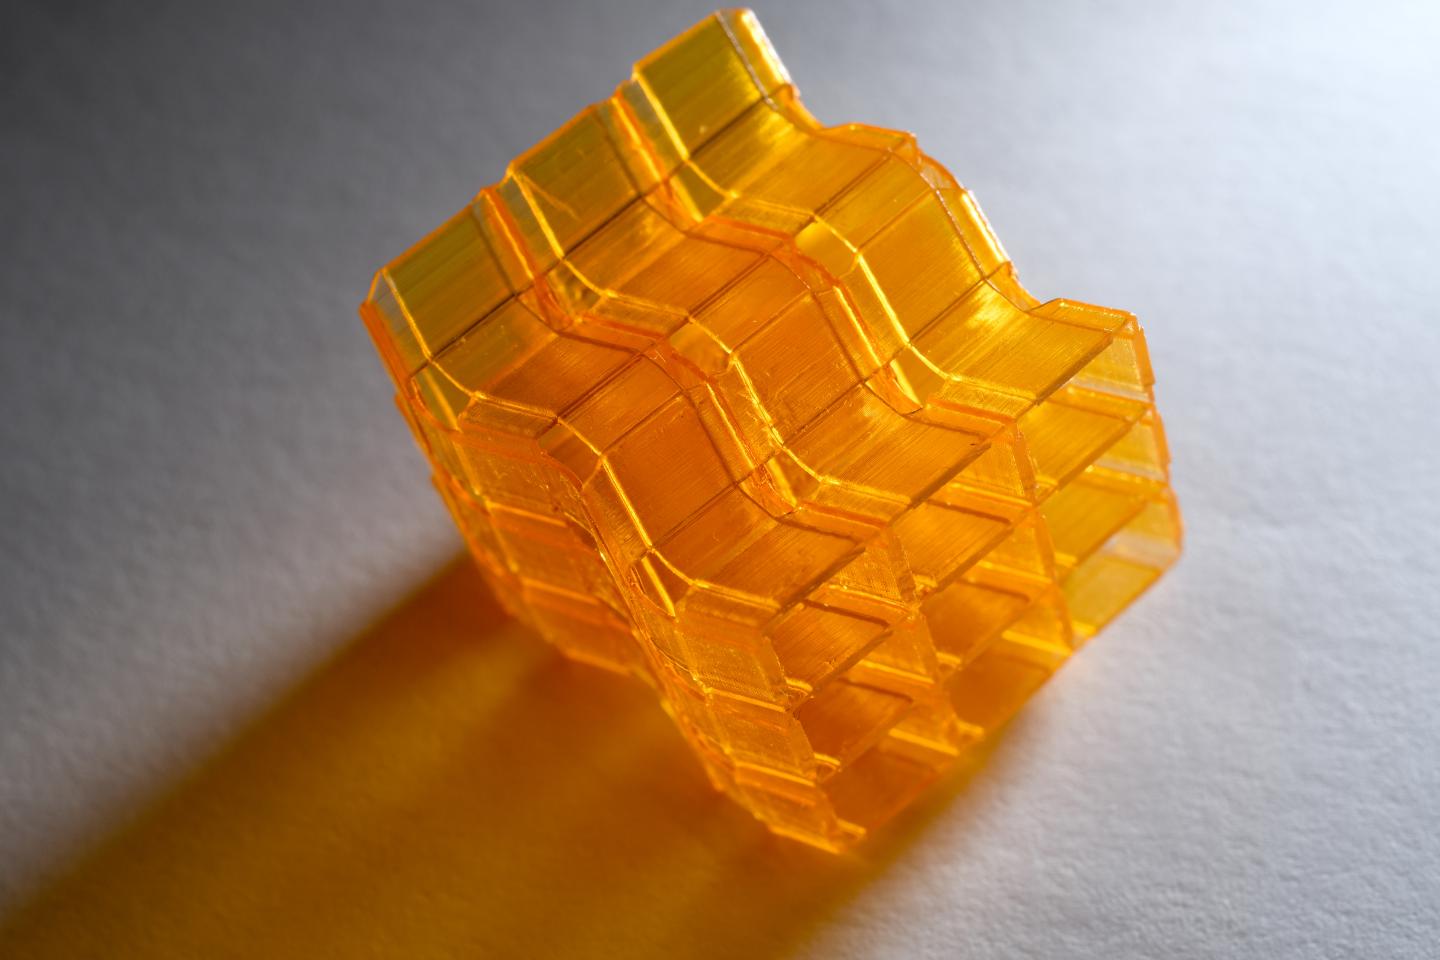 Close-up of 3D Printed Origami Structure